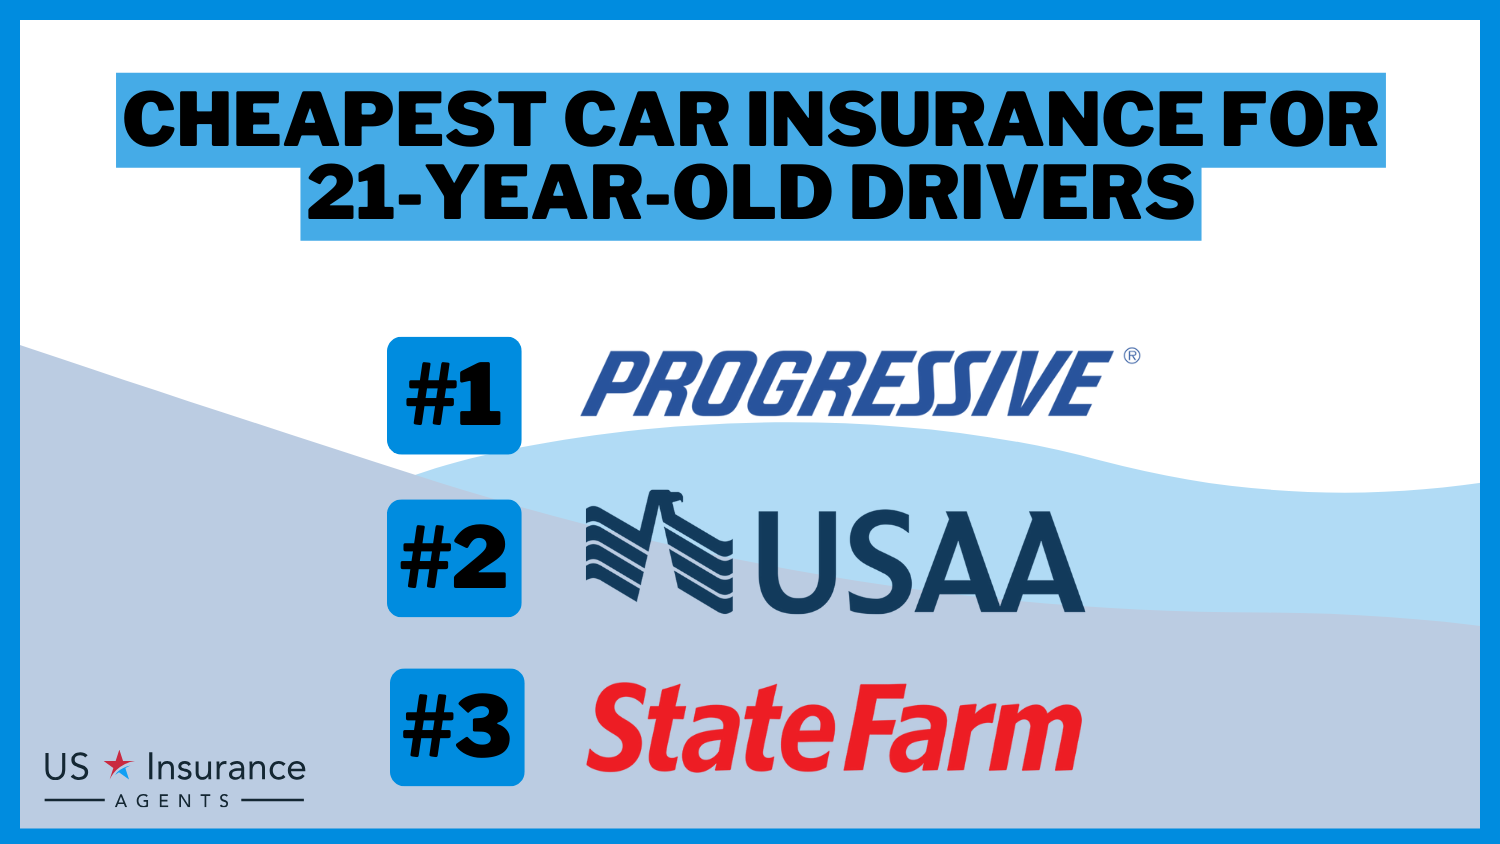 Cheapest Car Insurance Companies for 21-Year-Old Drivers: Progressive, USAA, and State Farm.